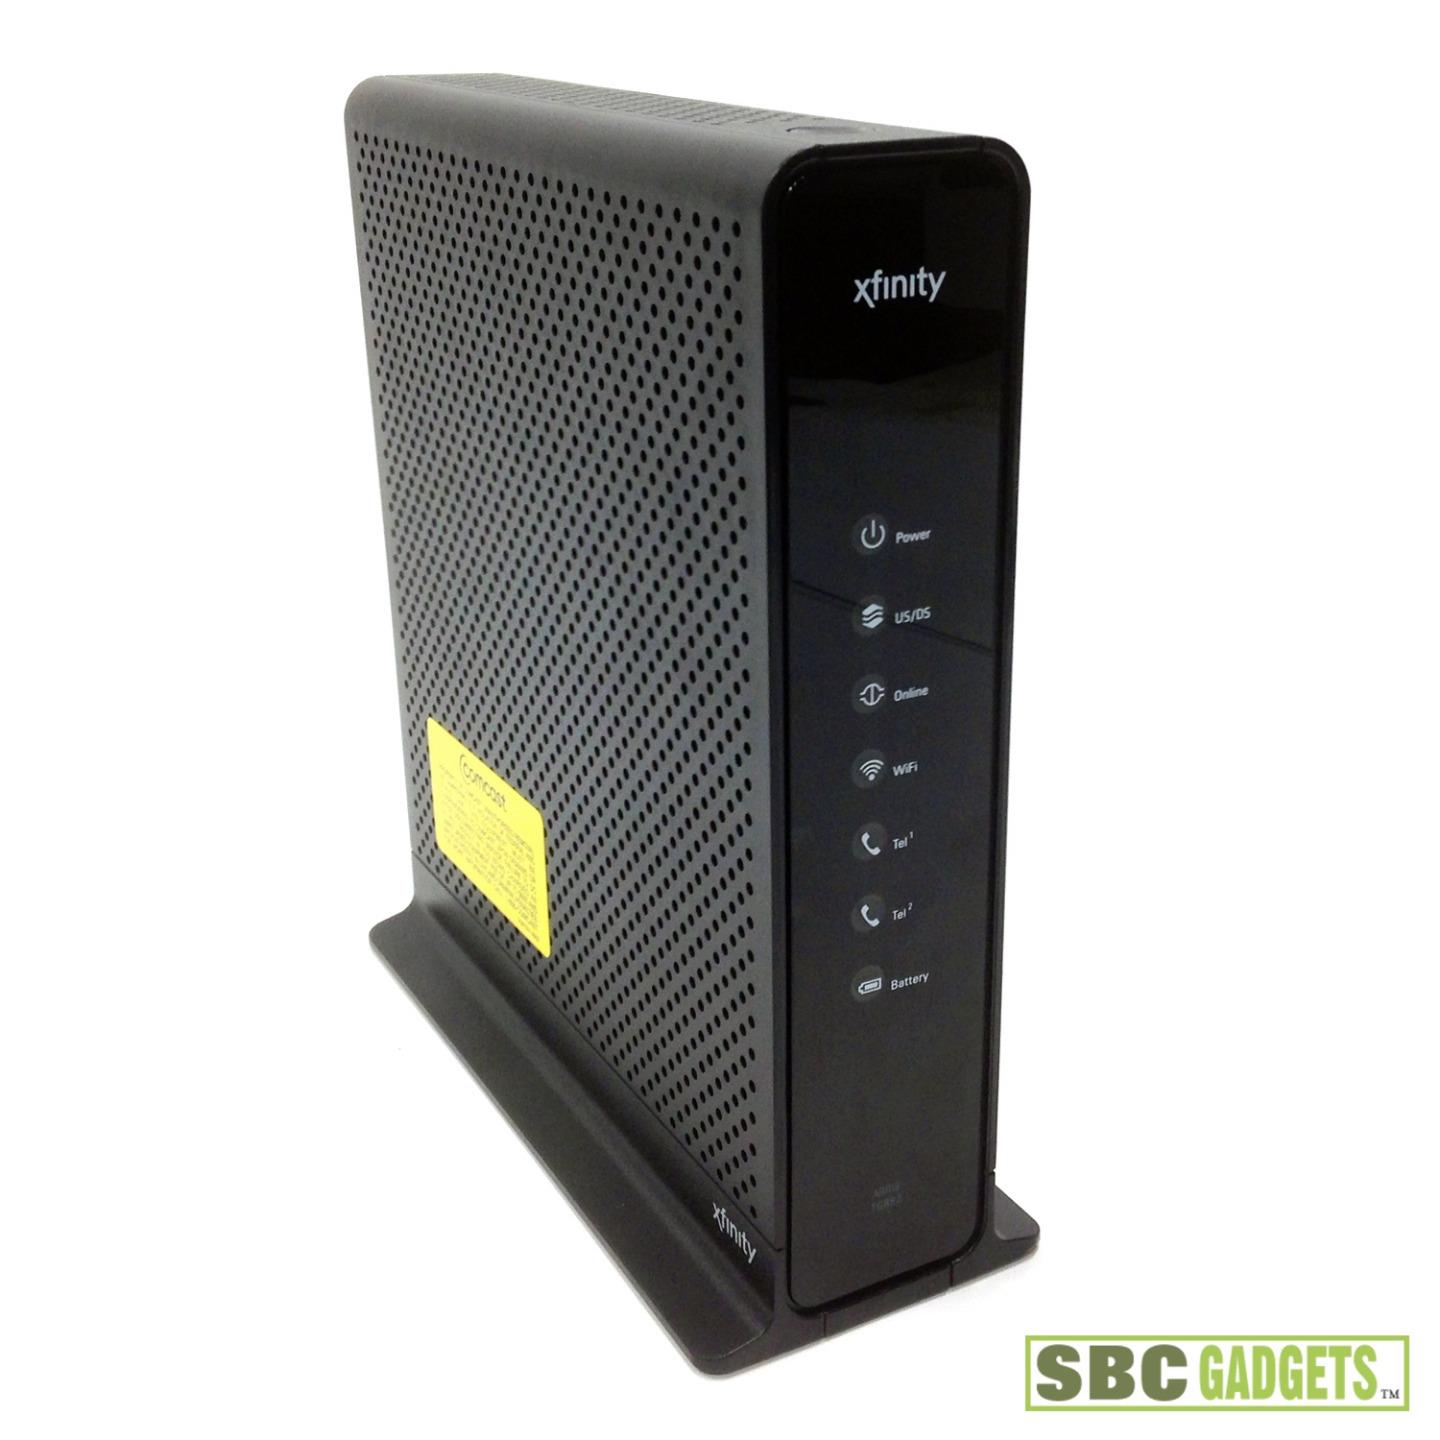 XFINITY ARRIS Touchstone DOCSIS 3.0 Cable Modem Wireless Router